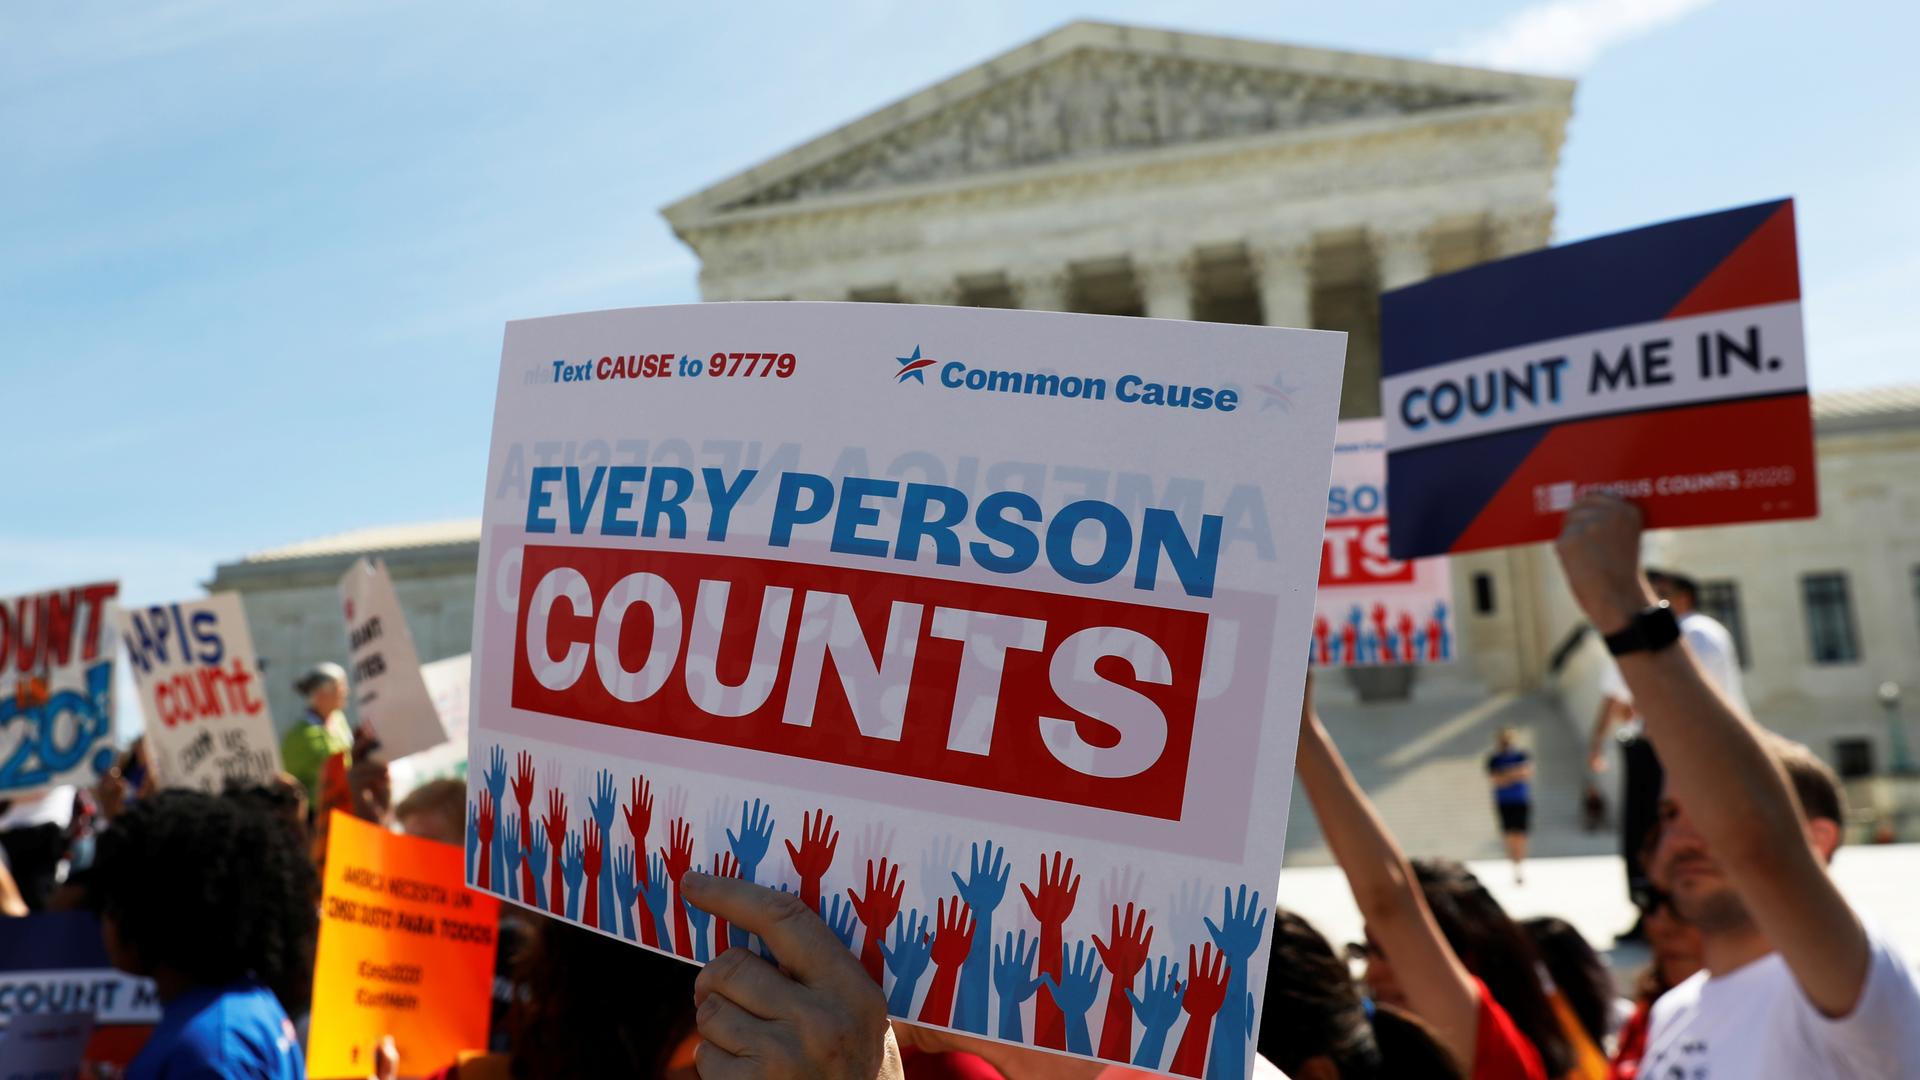 Protesters stand outside court with sign that reads "Every person counts"